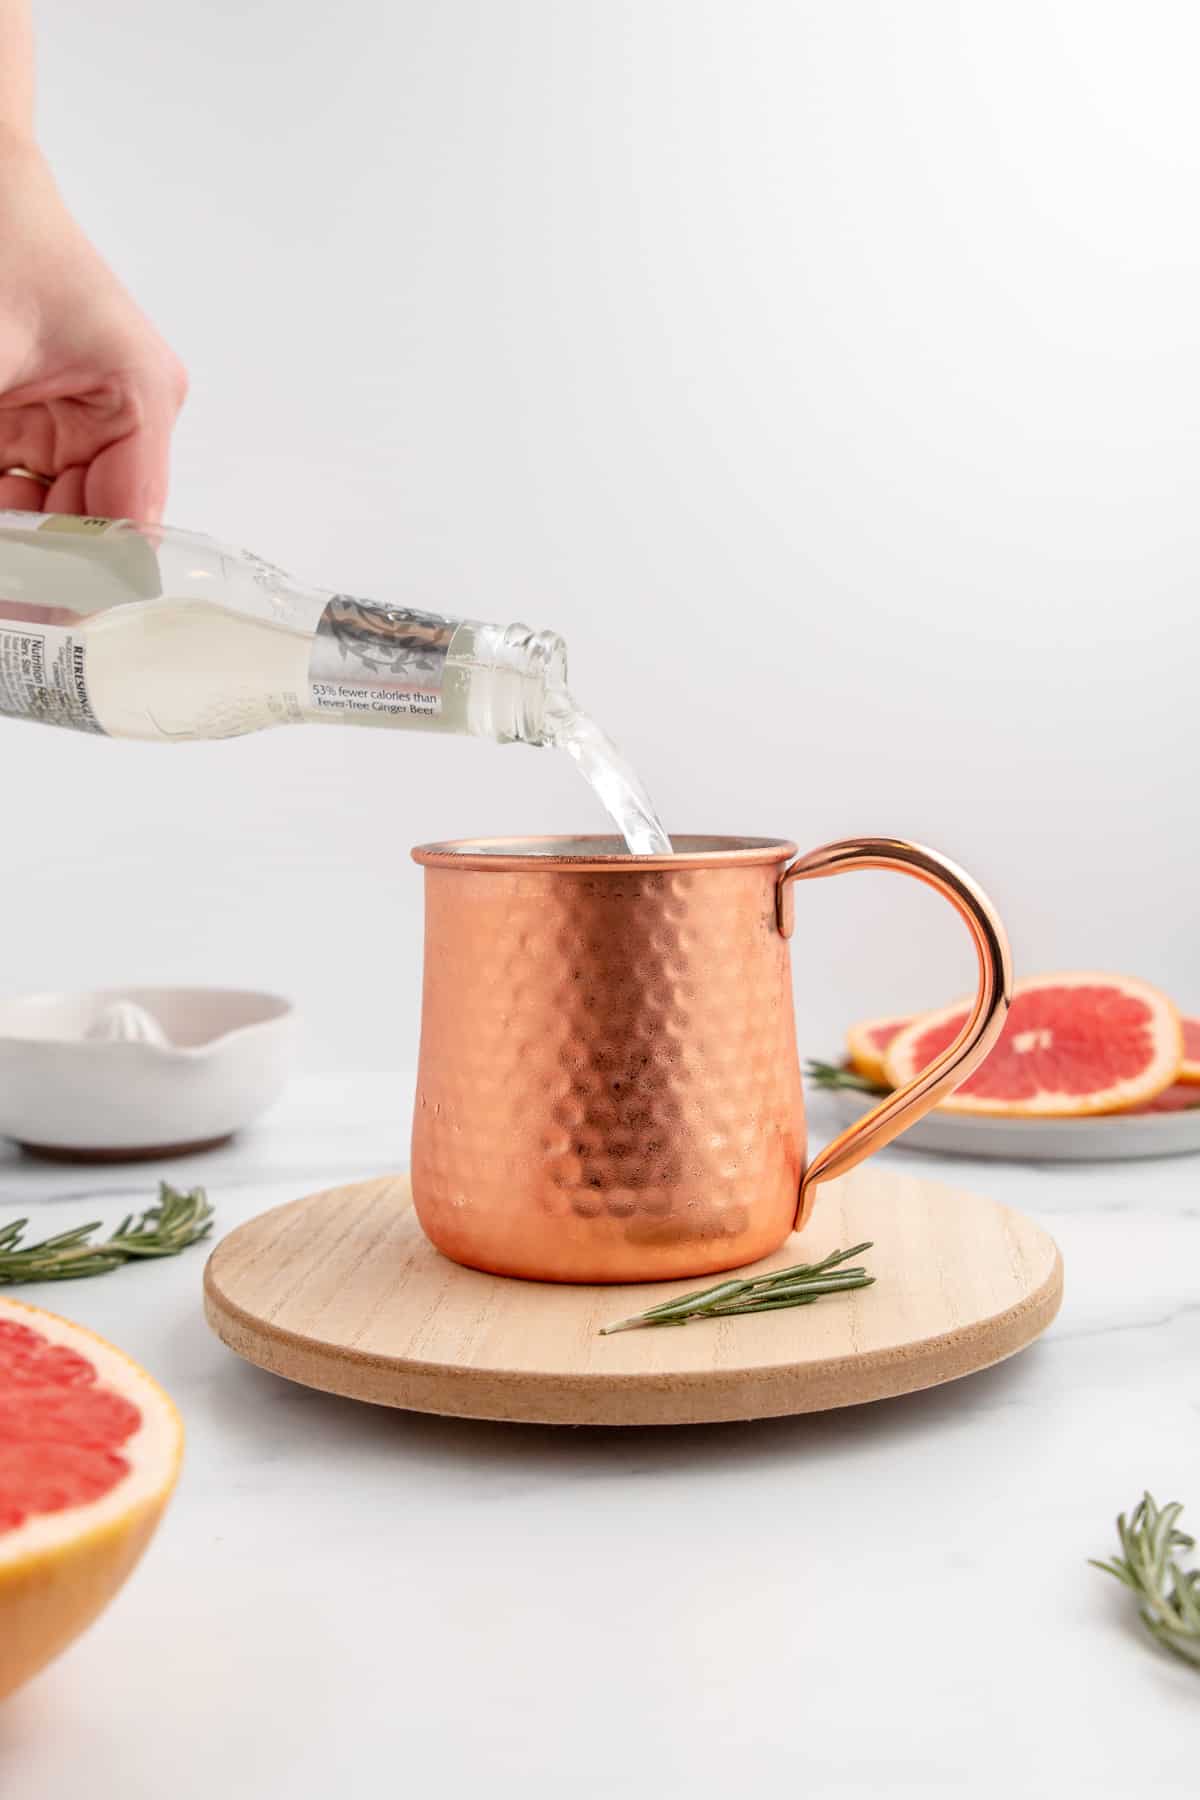 Pouring ginger beer into a copper mug to make a Moscow Mule.